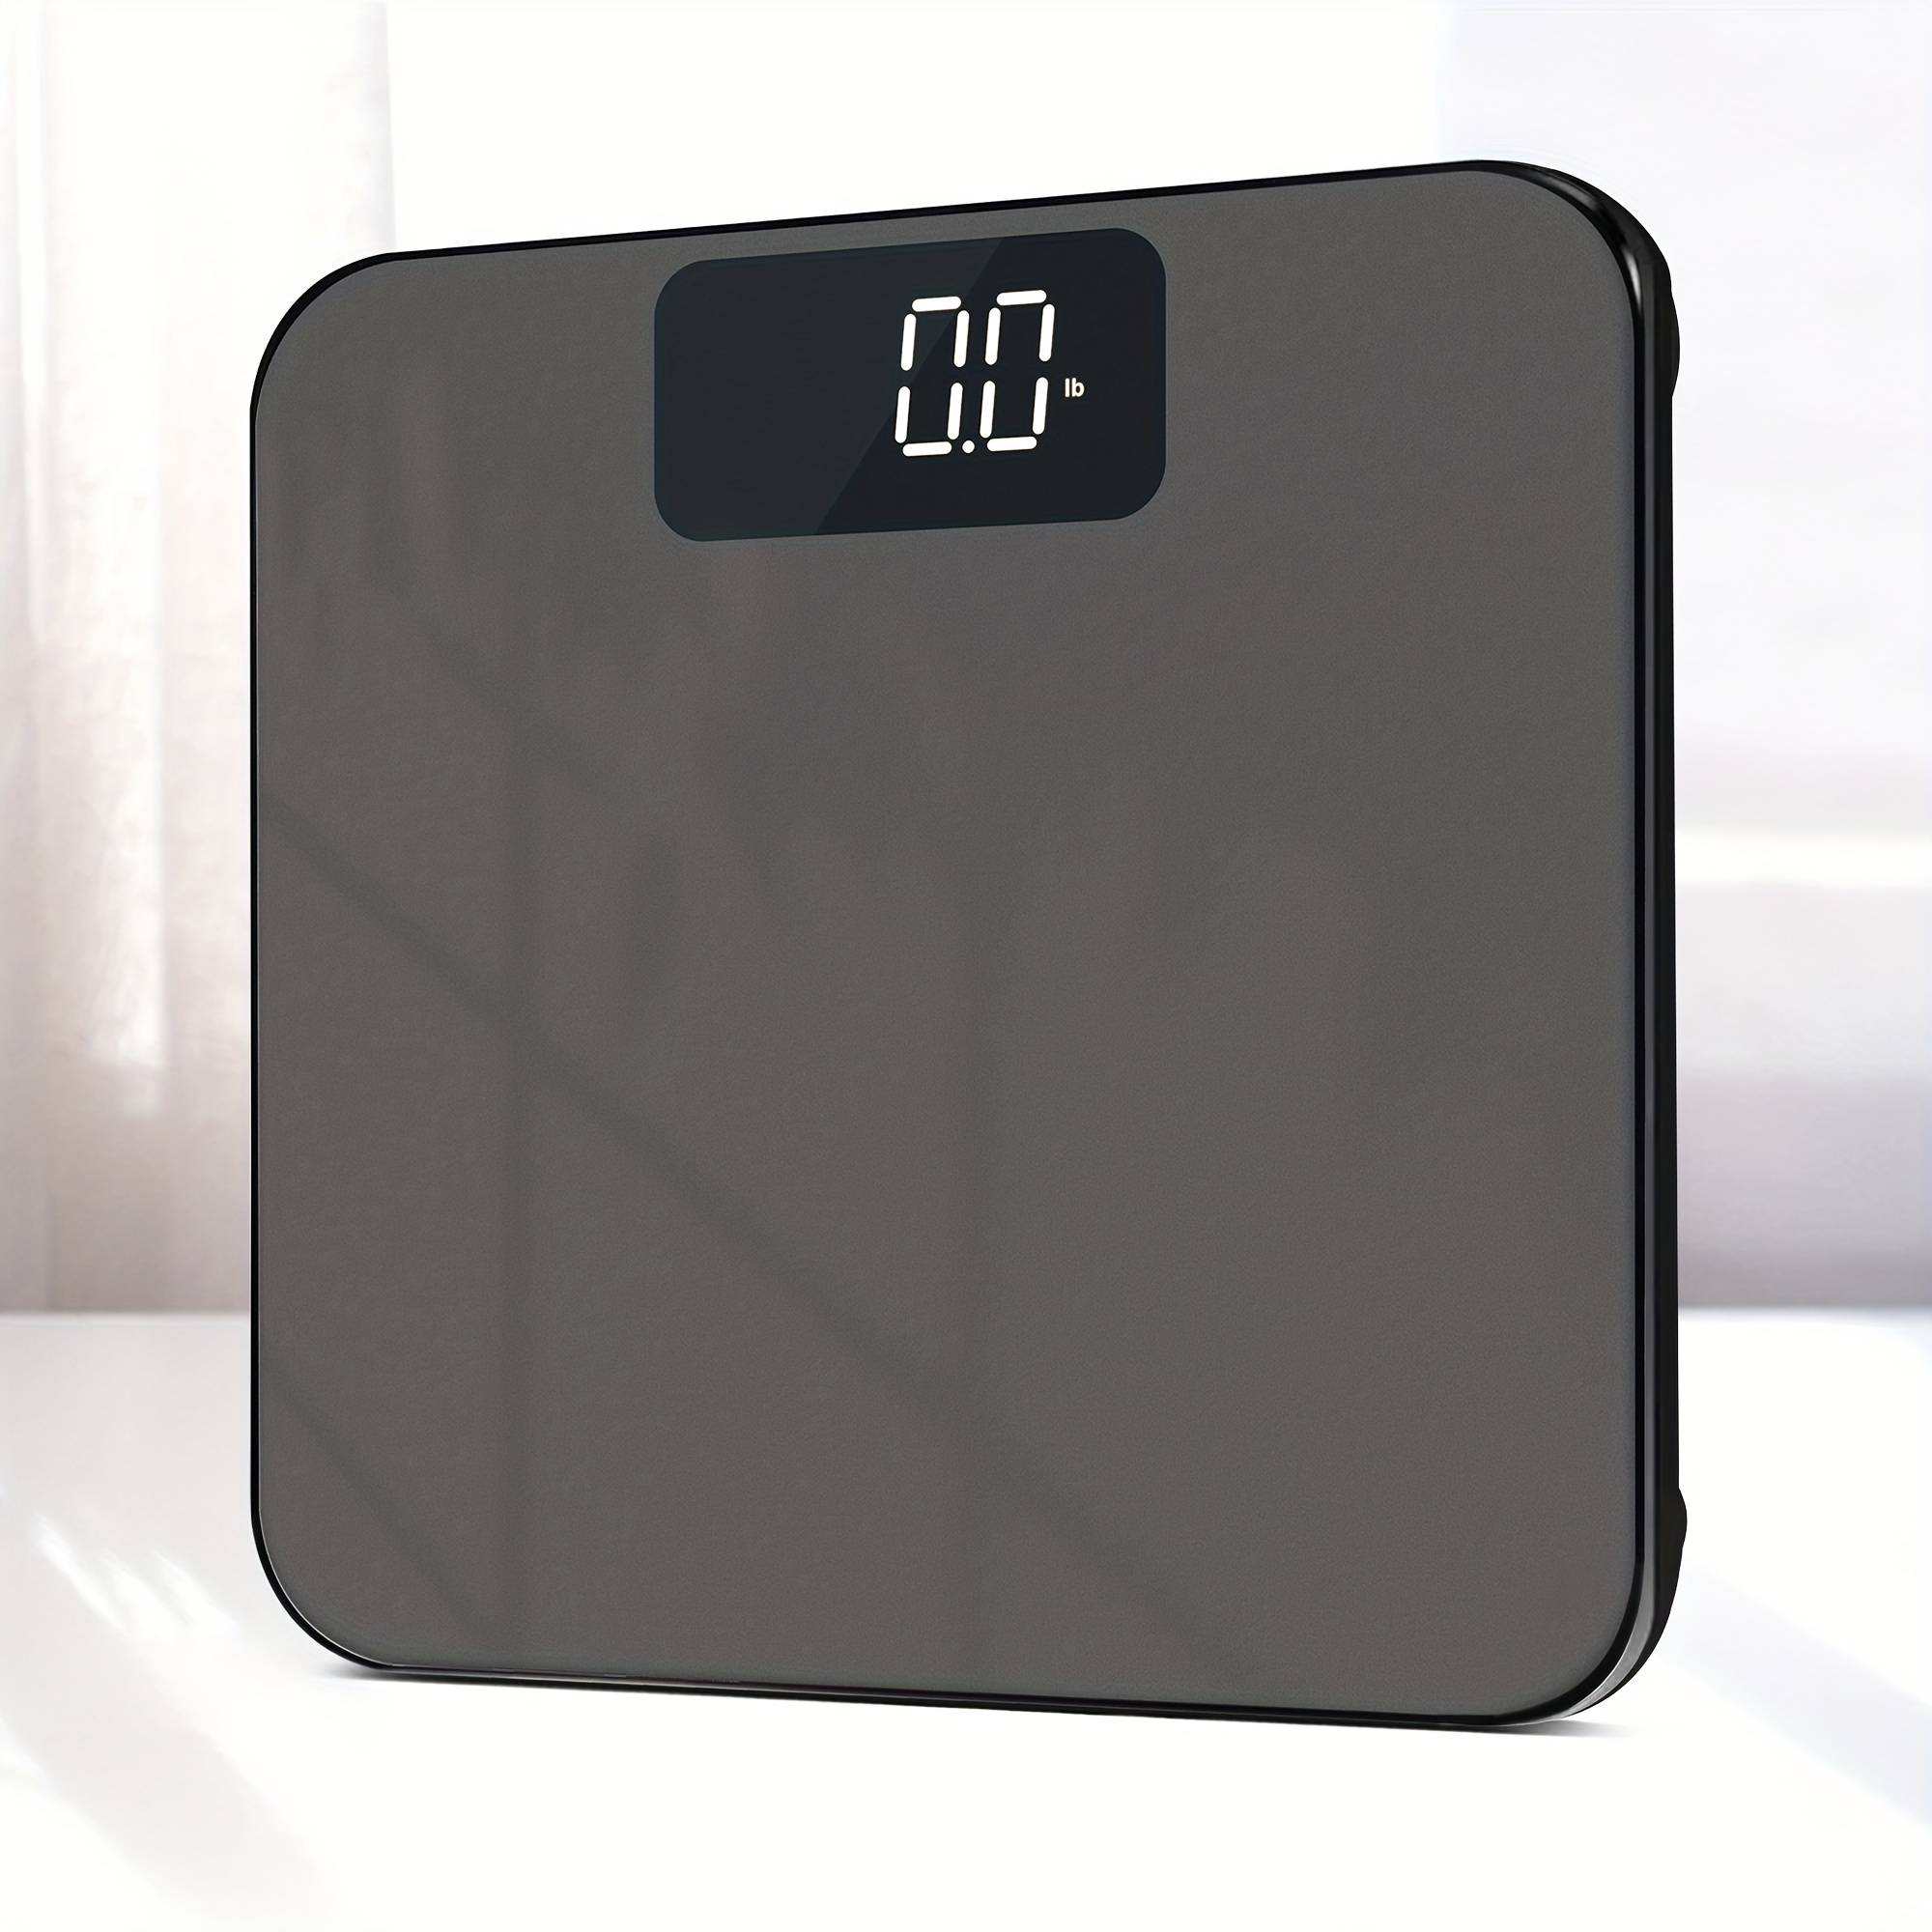 Digital Bathroom Scale Body Weight Scales 400 Lbs Ultra Slim Most Accurate  for G